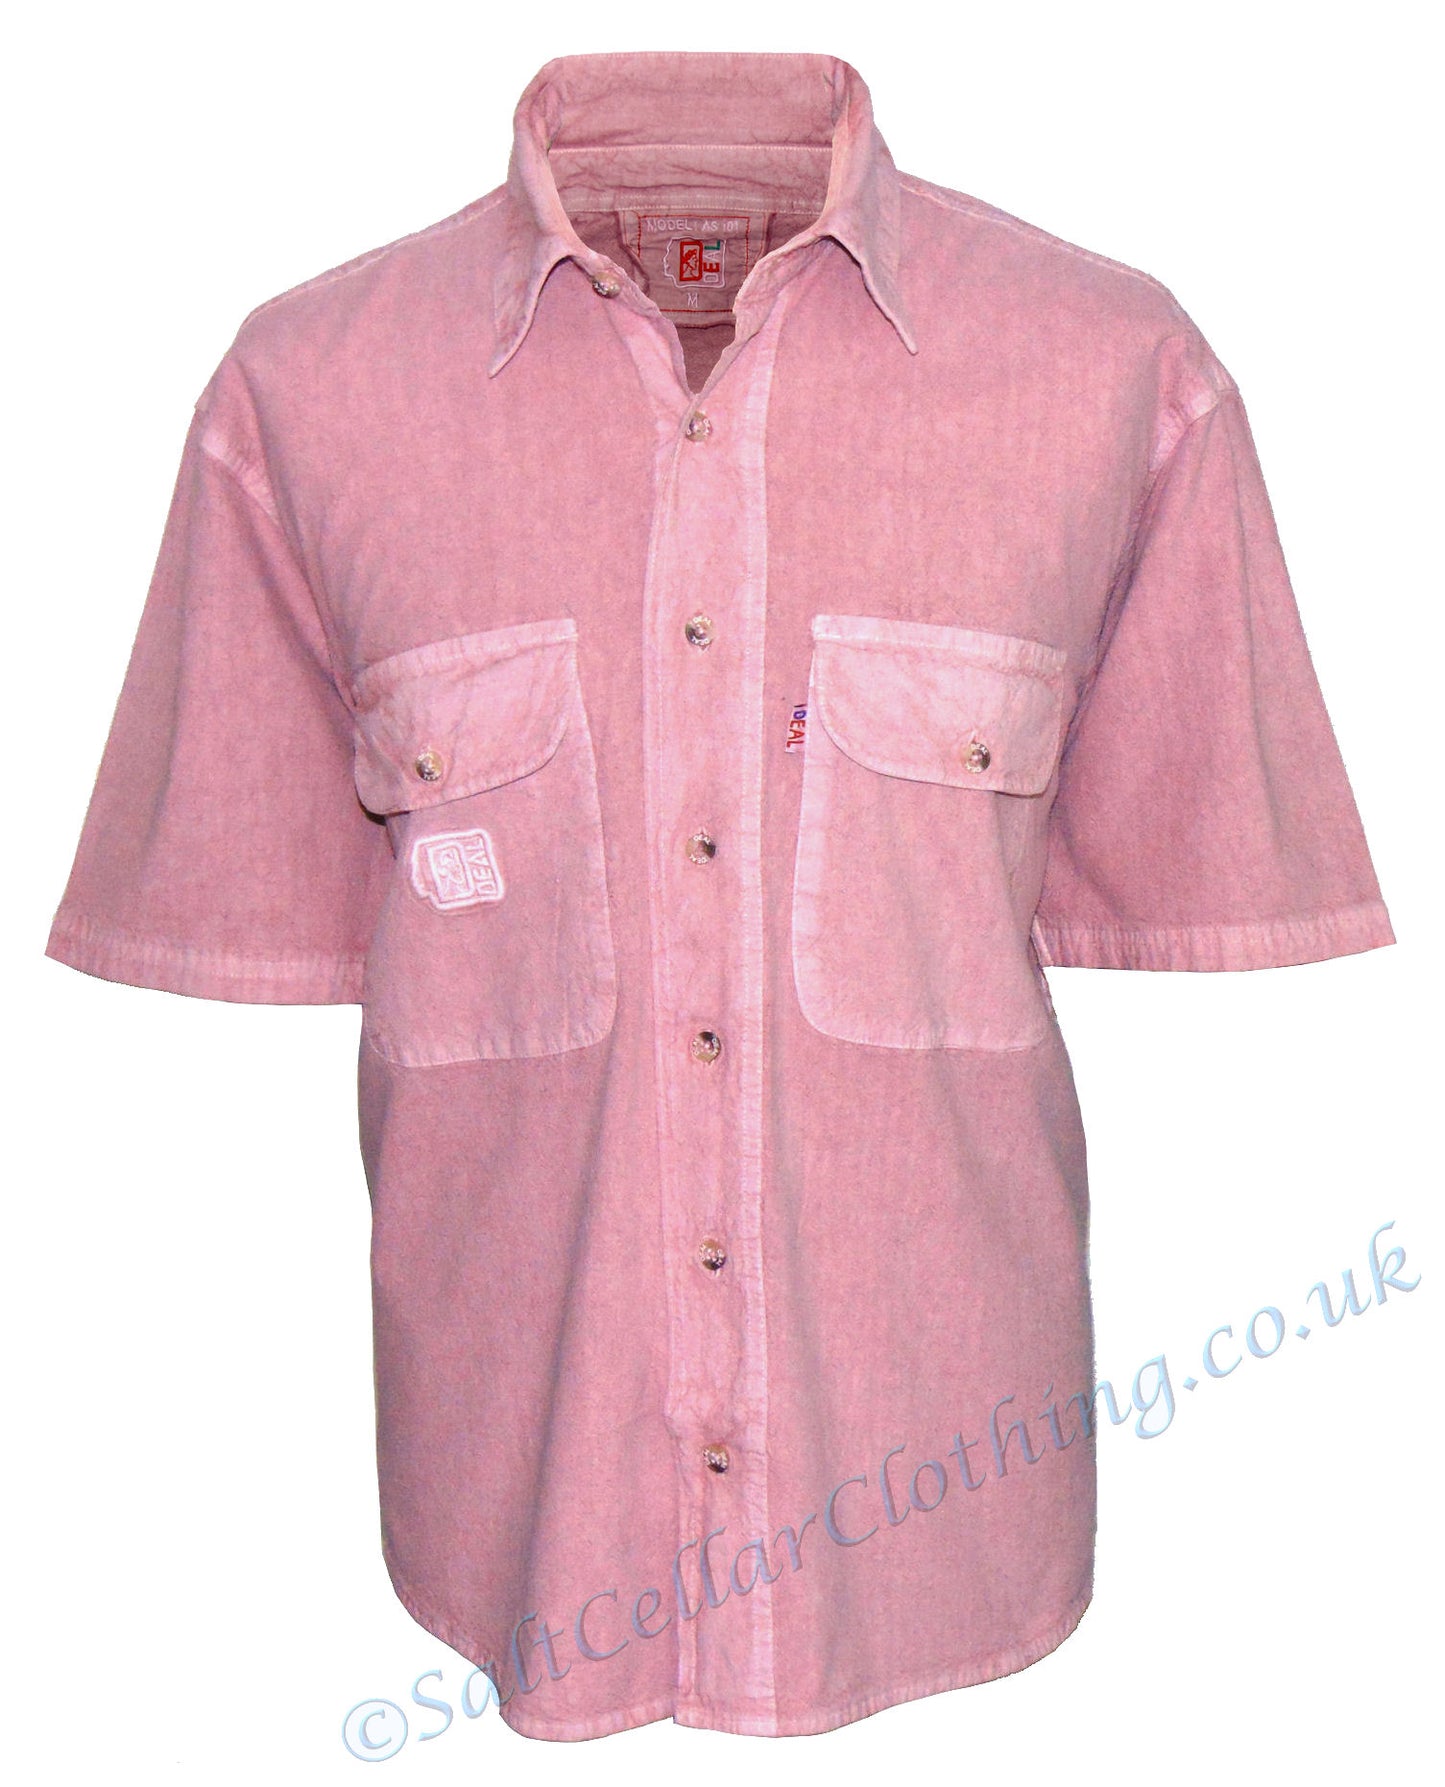 Deal Clothing Mens 'AS101' Short-Sleeved Shirt - Salmon / Dusty Pink